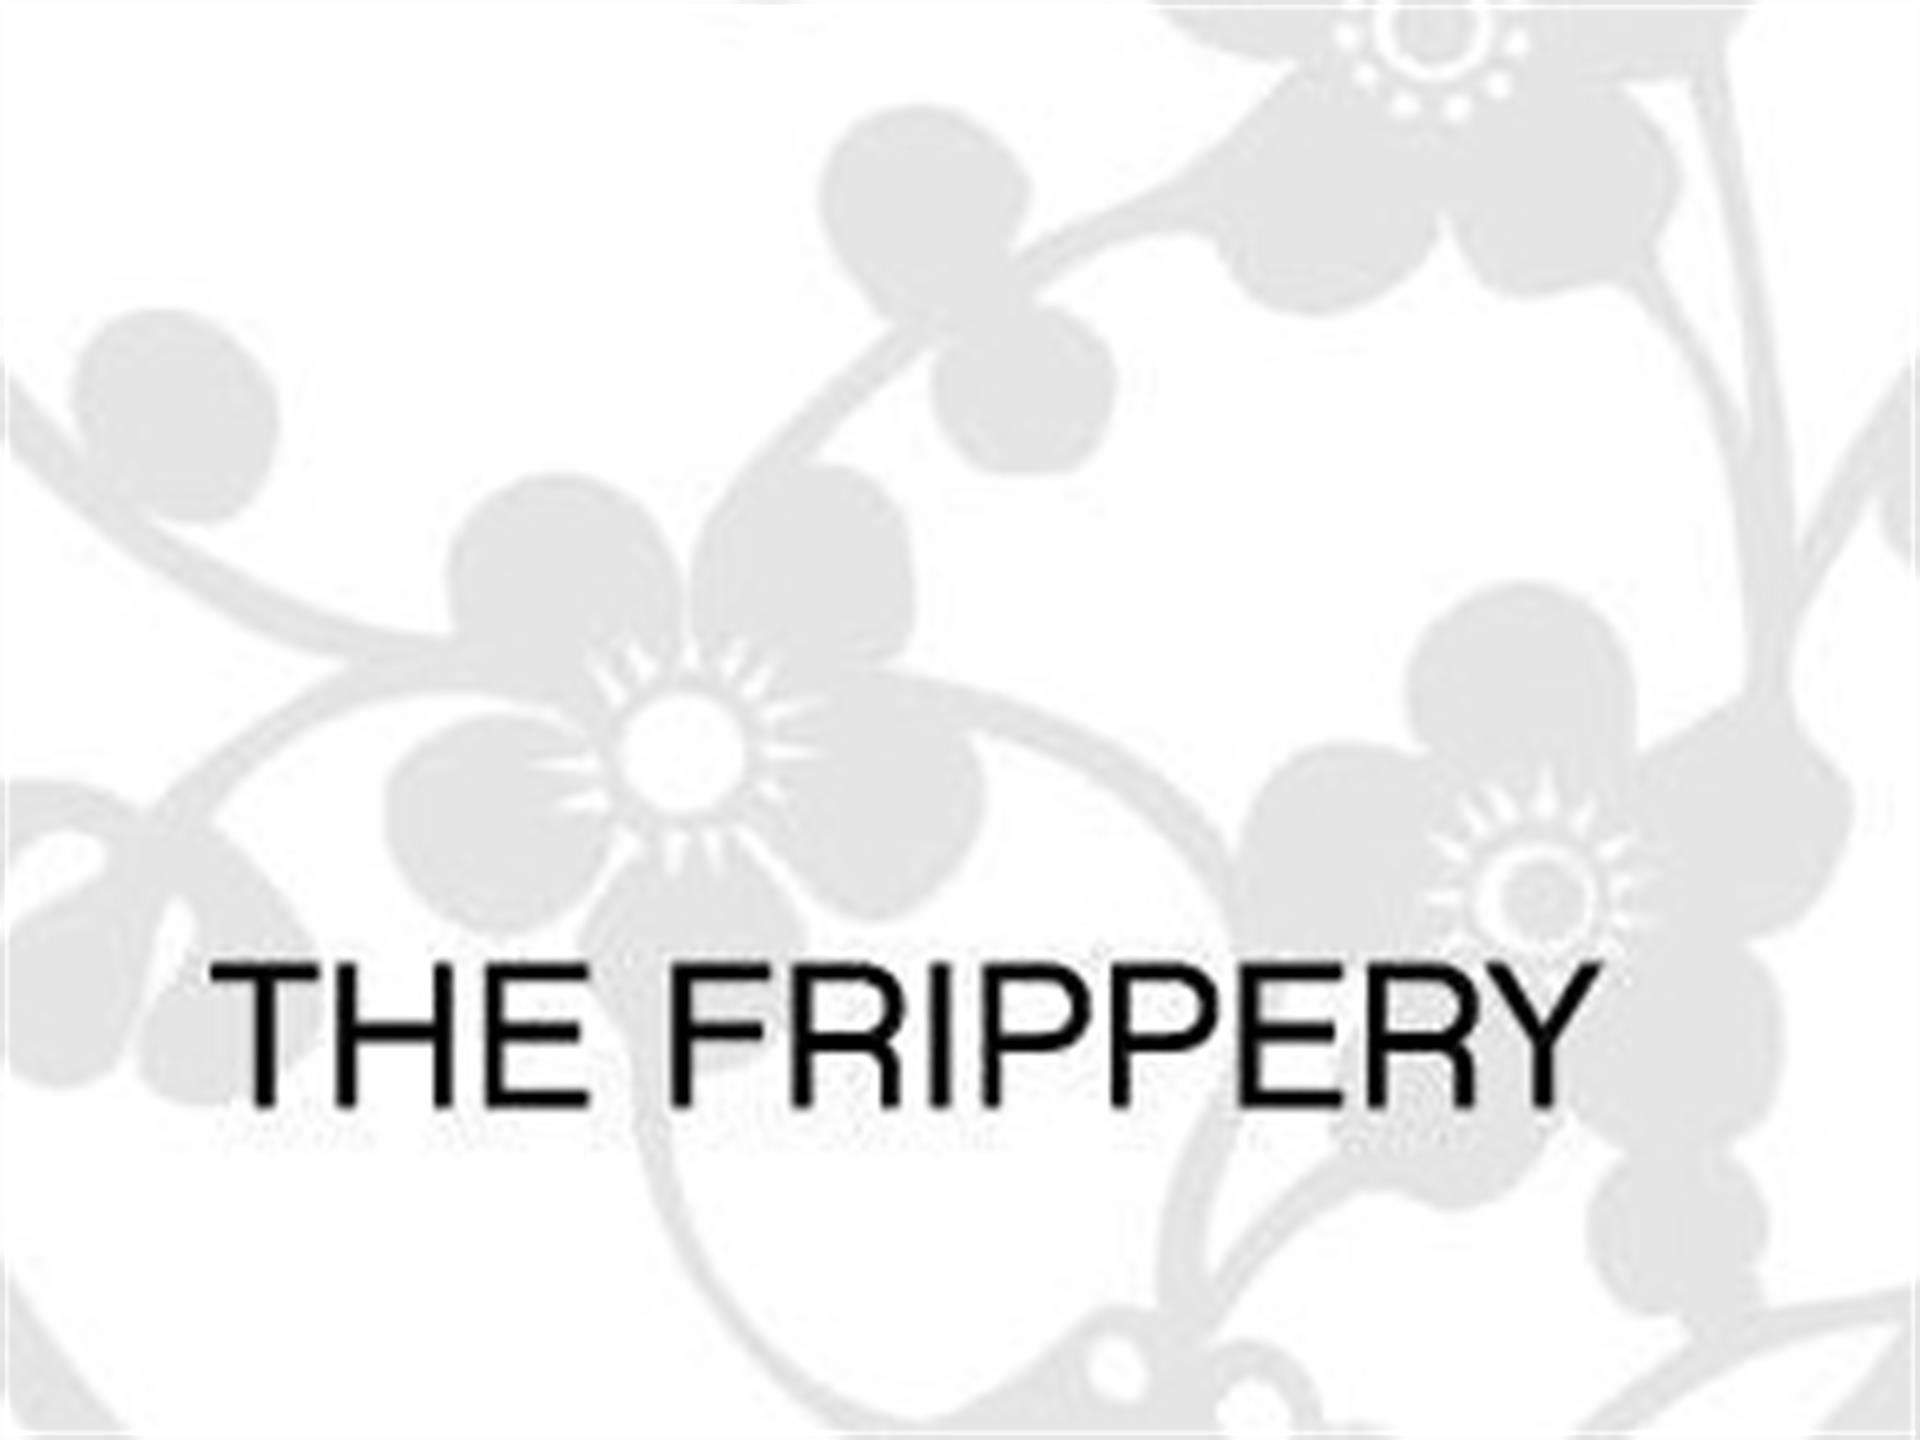 The Frippery